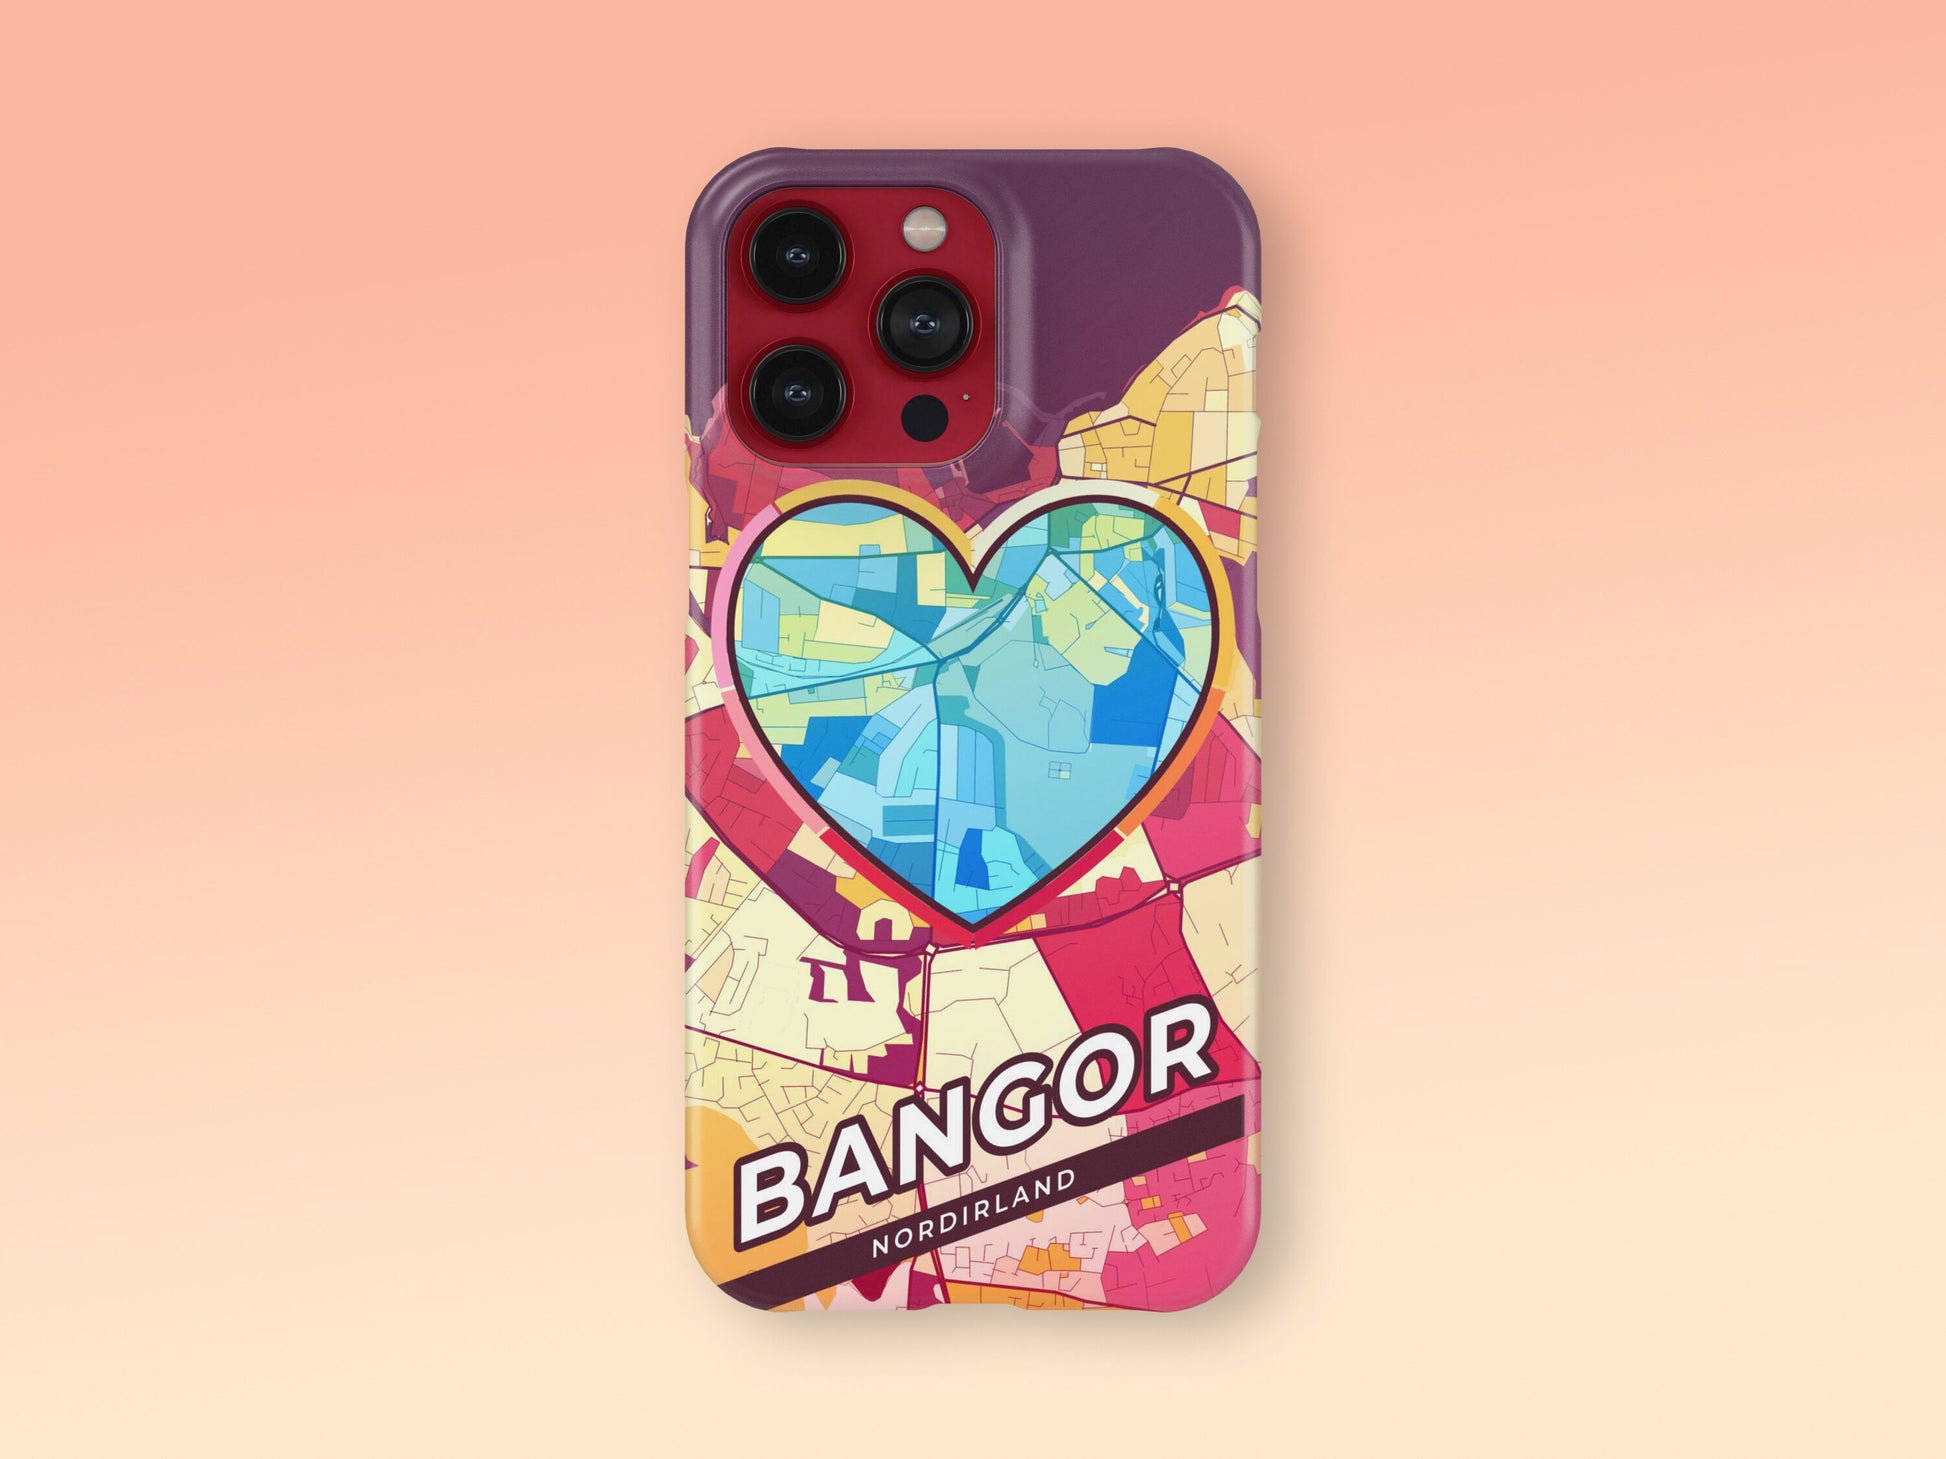 Bangor Northern Ireland slim phone case with colorful icon. Birthday, wedding or housewarming gift. Couple match cases. 2